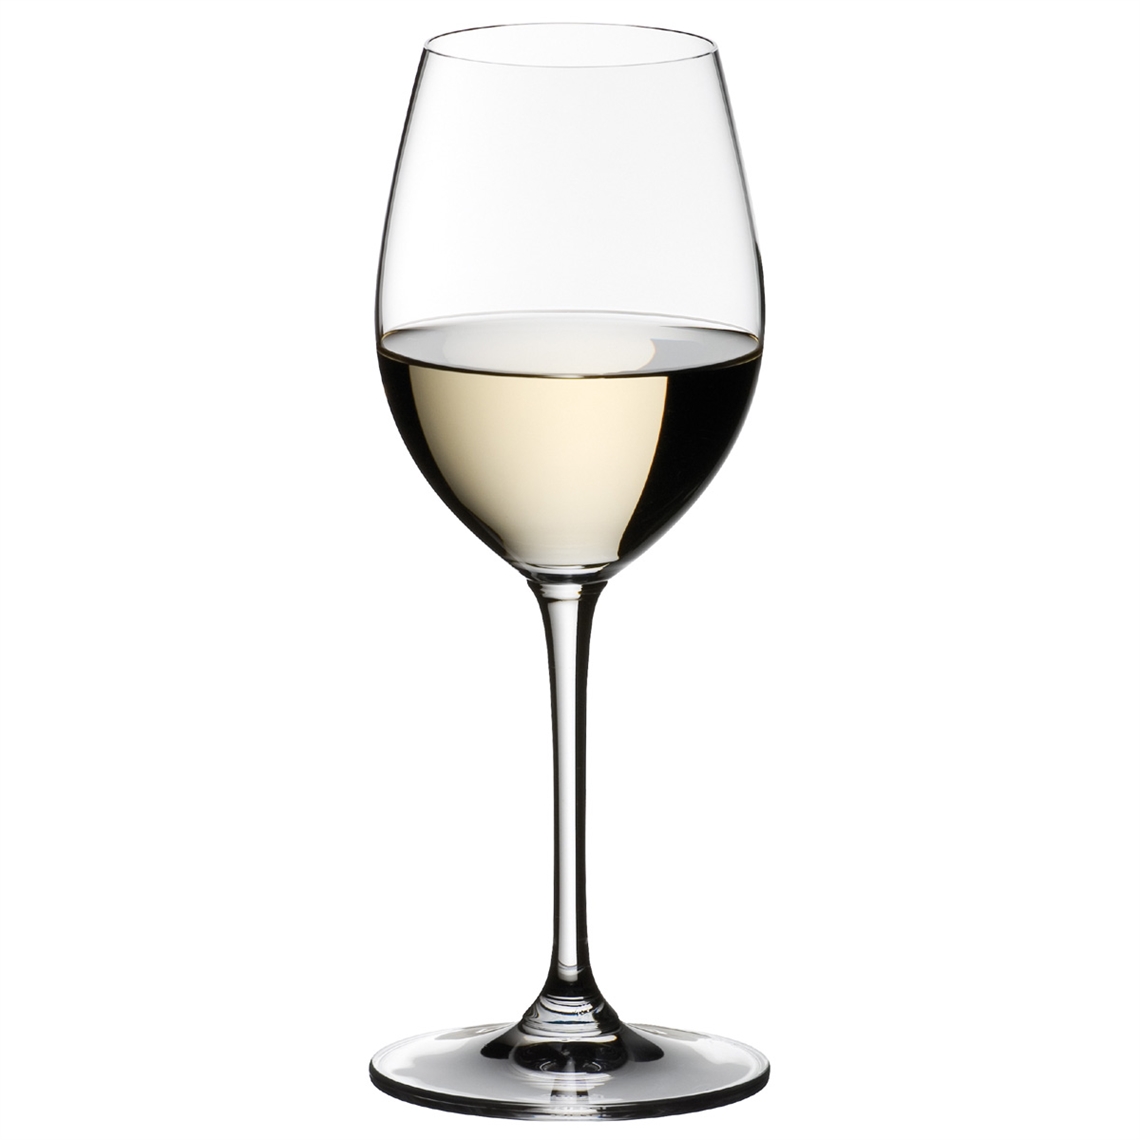 View more which riedel wine glass to choose from our Dessert Wine Glasses range